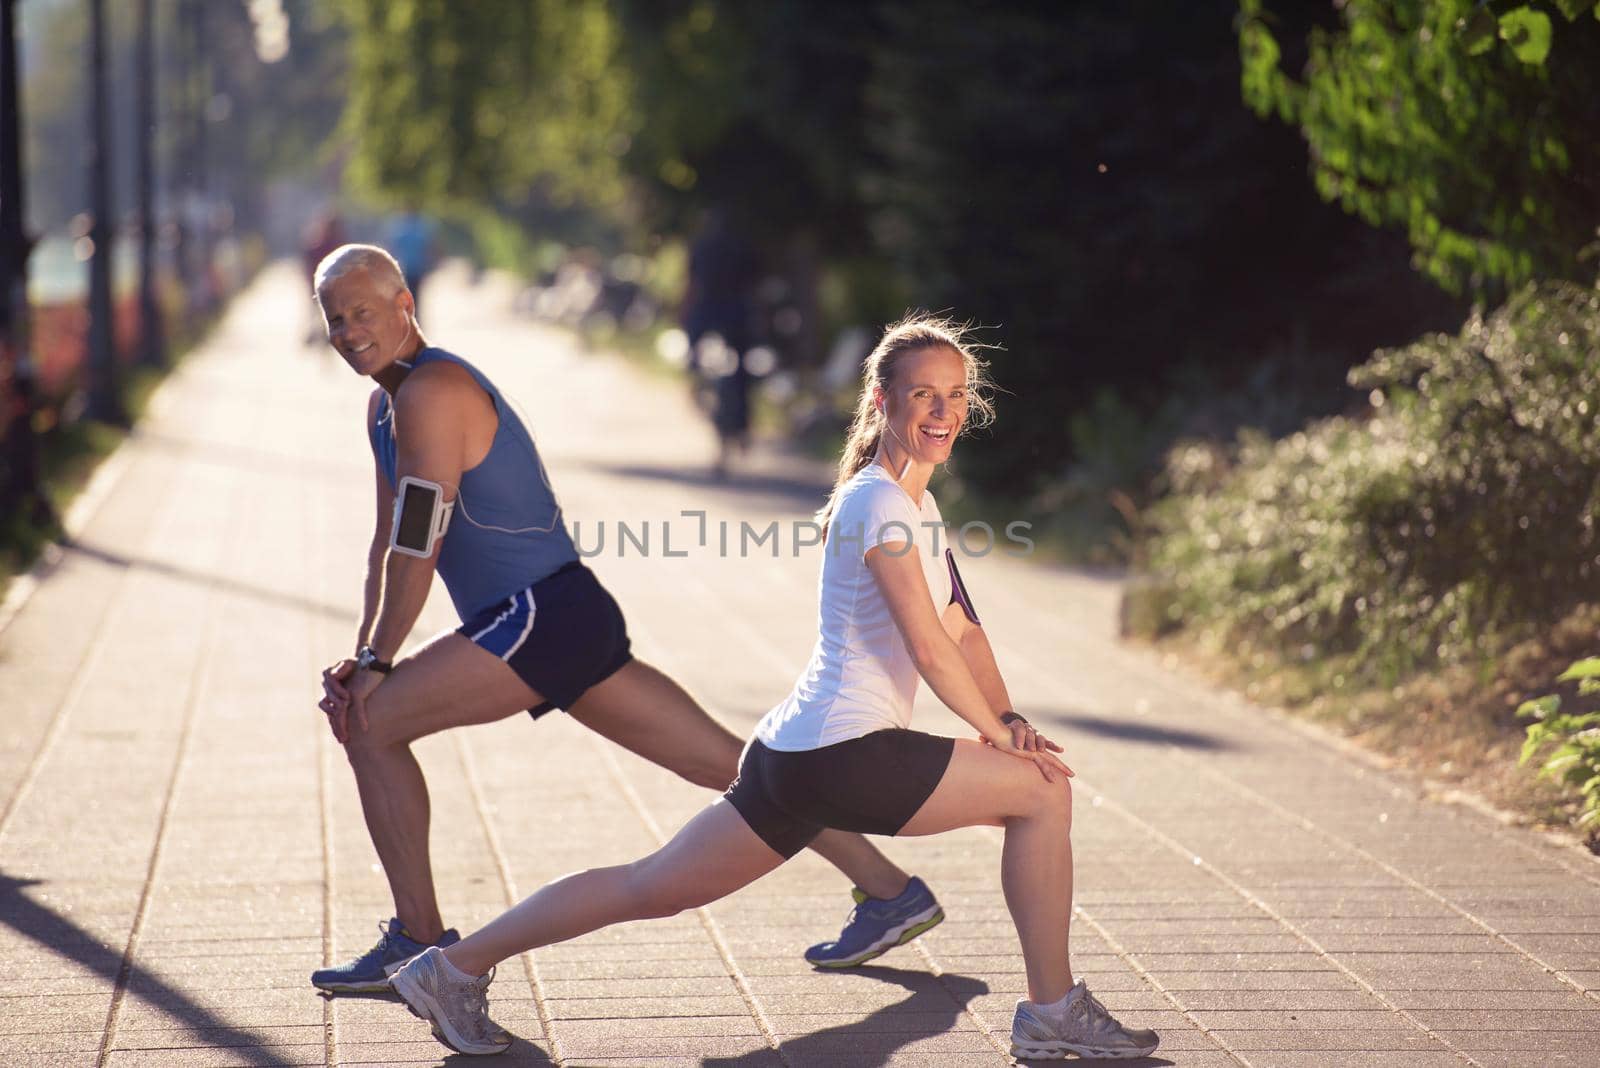 couple warming up and stretching before jogging by dotshock